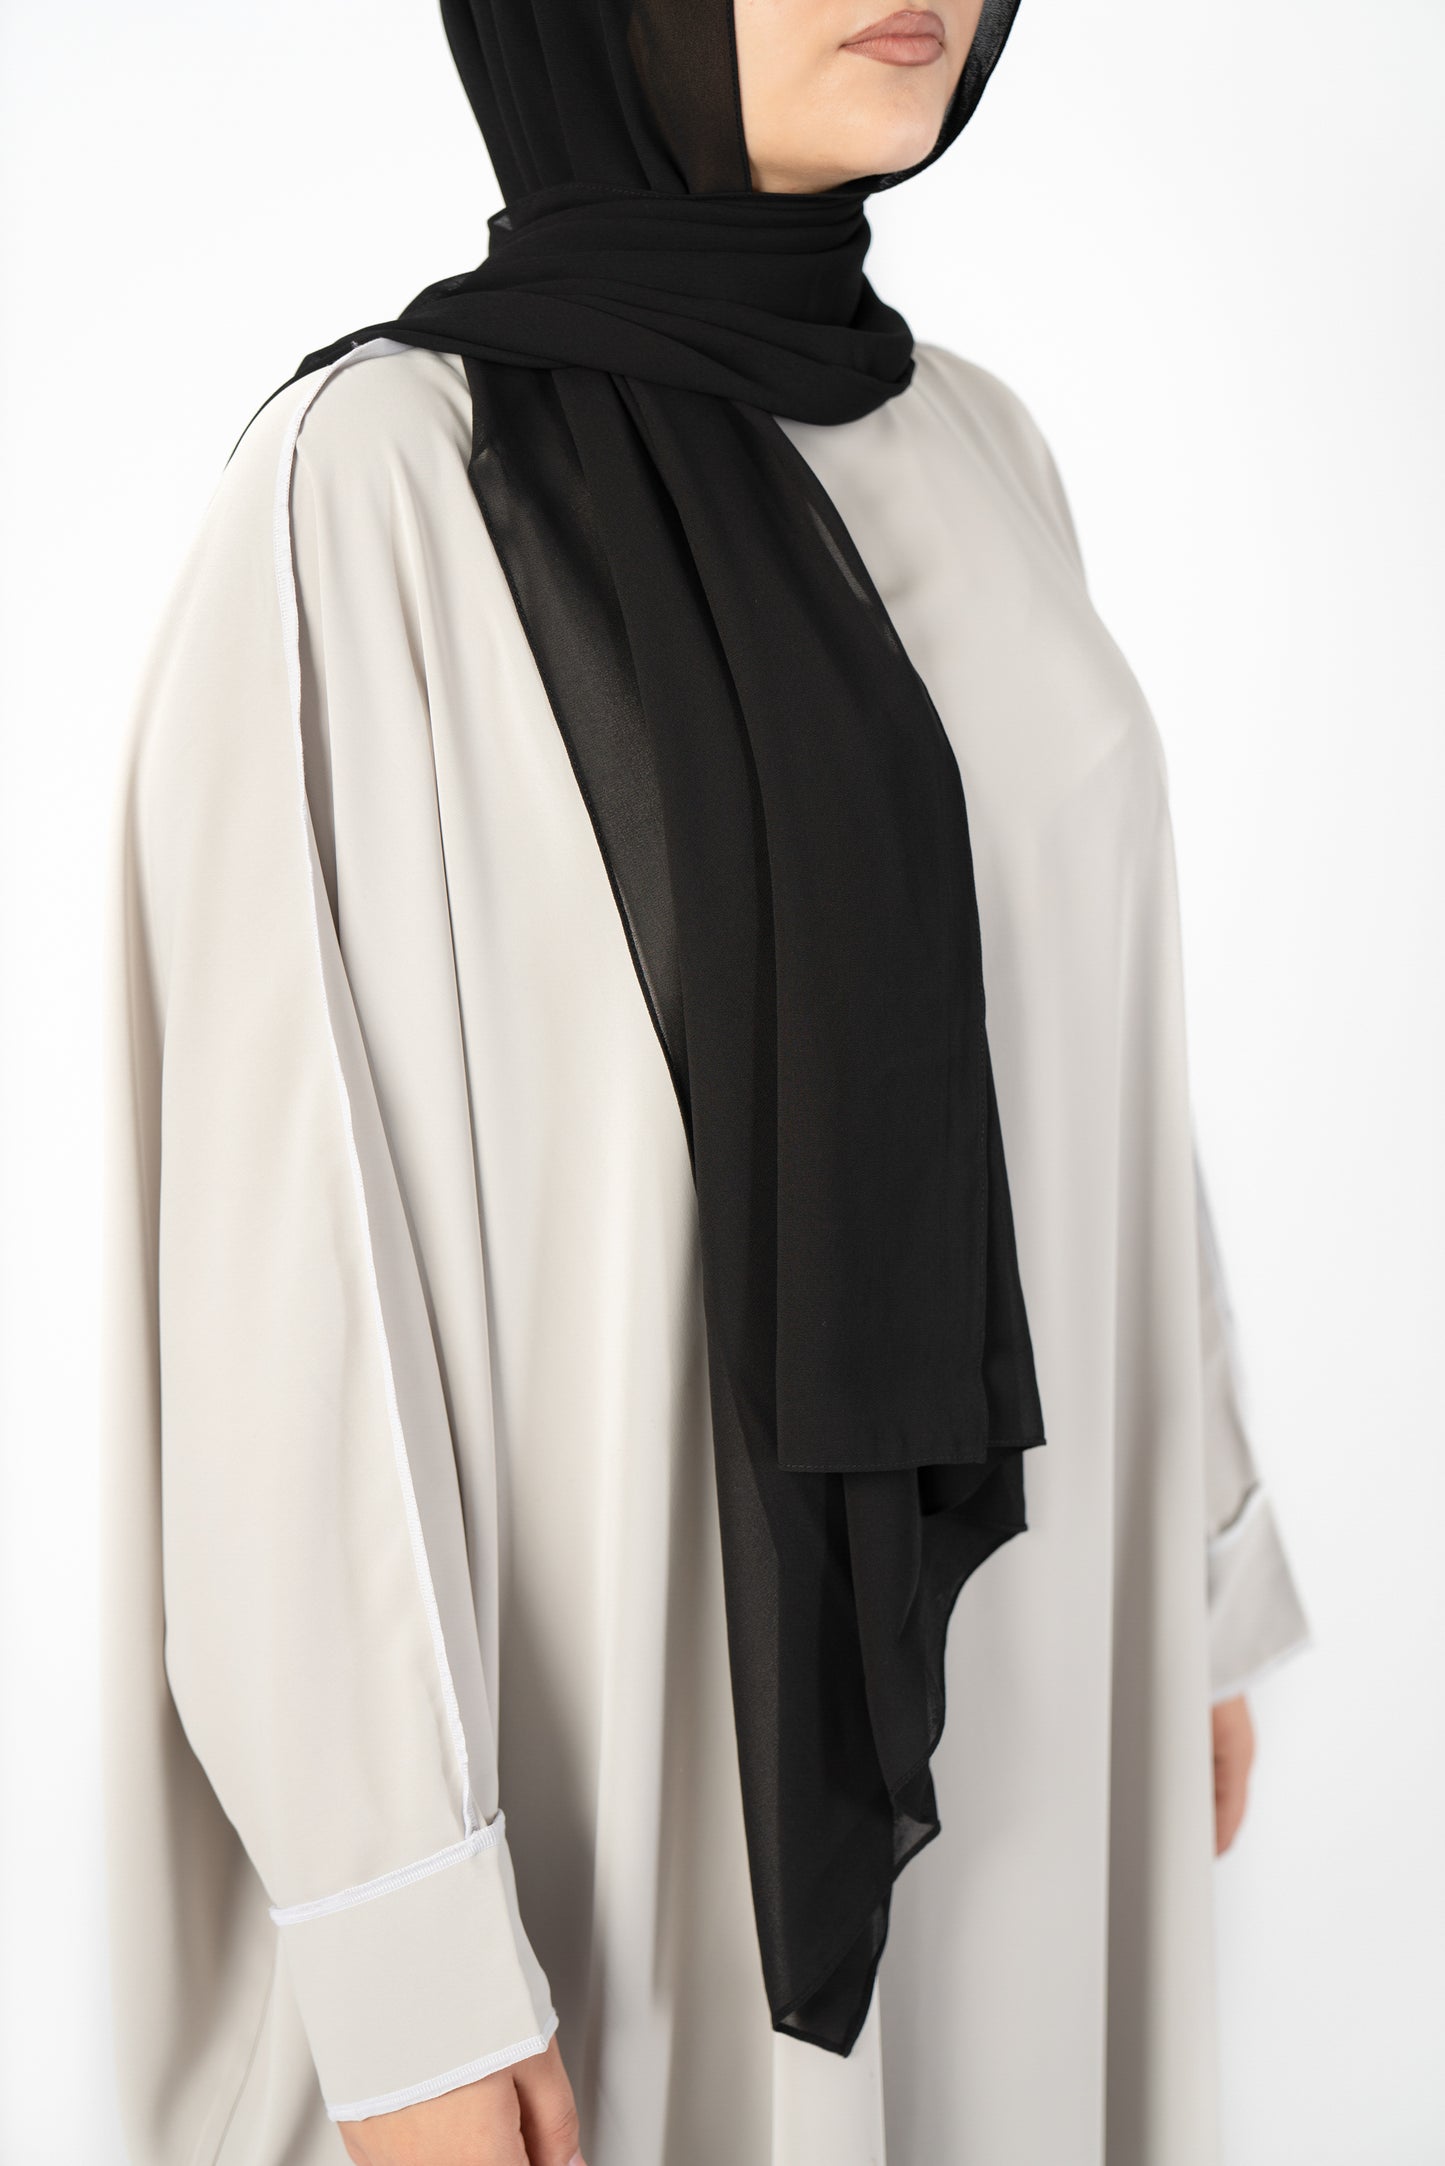 Introducing the 'Tie Back Instant Hijab' which features our Premium Chiffon shawl stitched to our Cotton Lycra Inner cap. The tie-back feature allows adjustment of tightness to ensure versatility and upmost comfort. A perfect blend of two staple tone grays suitable for almost any outfit. Its easy-to-wear nature makes it essential in every wardrobe.